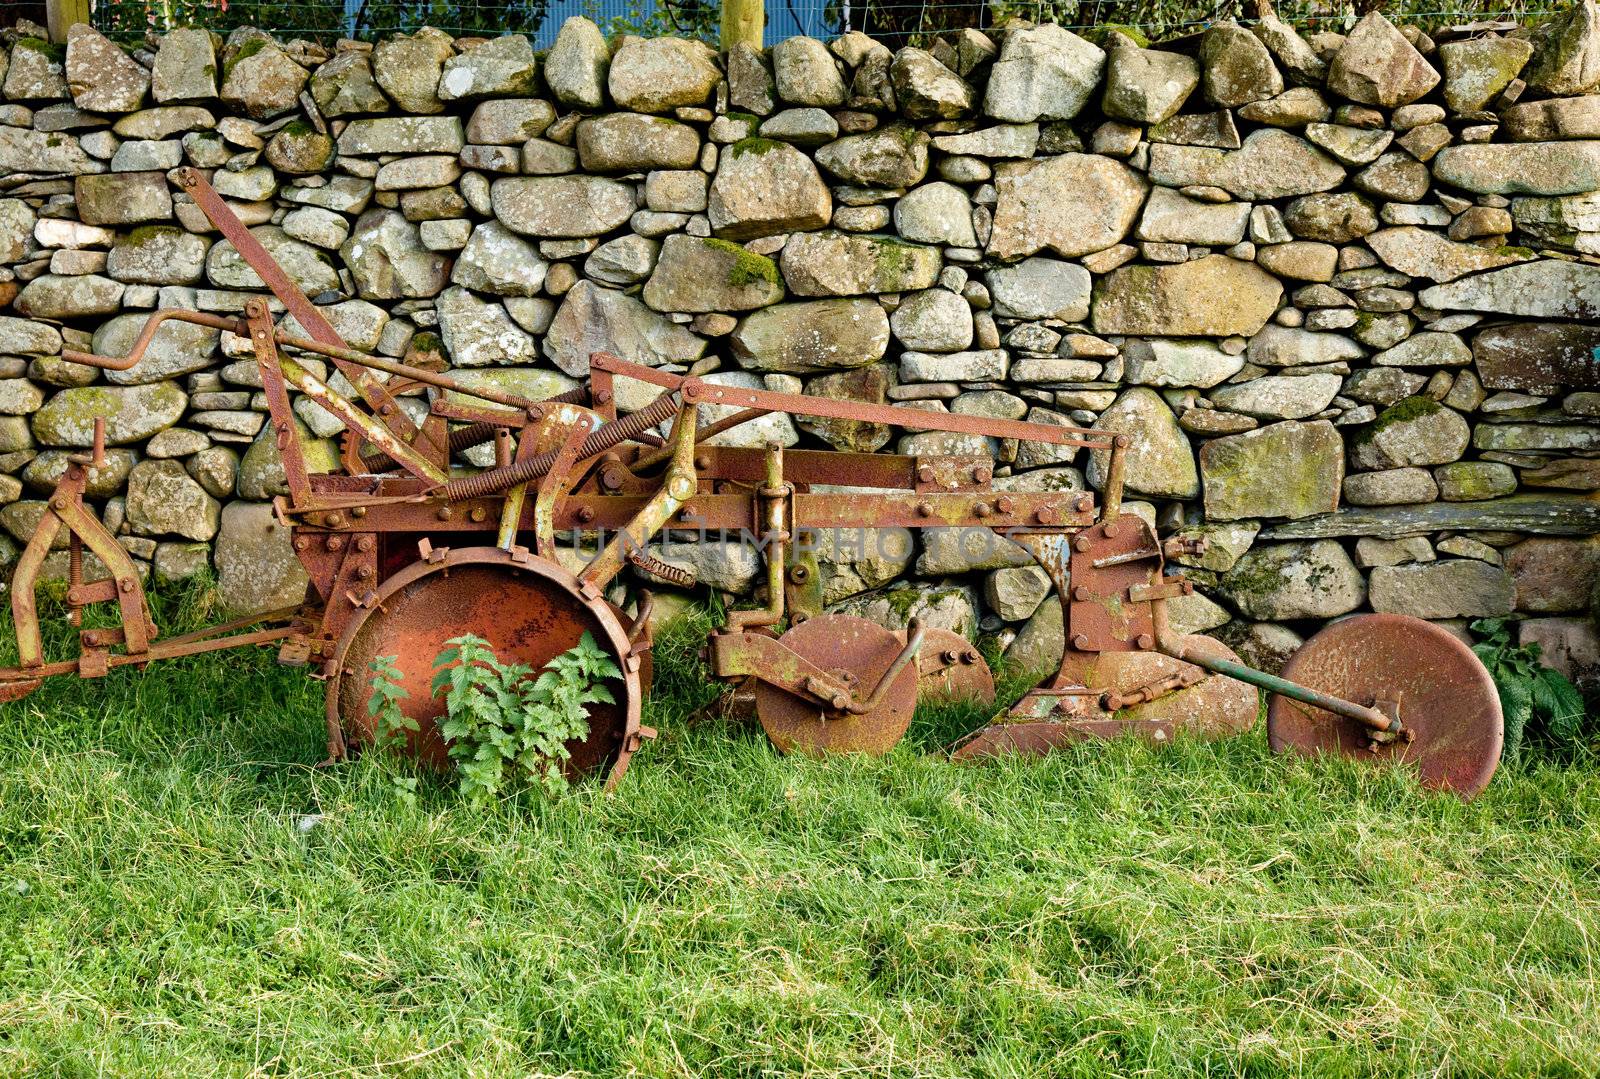 Old rusty plow in shadow of stone wall by steheap